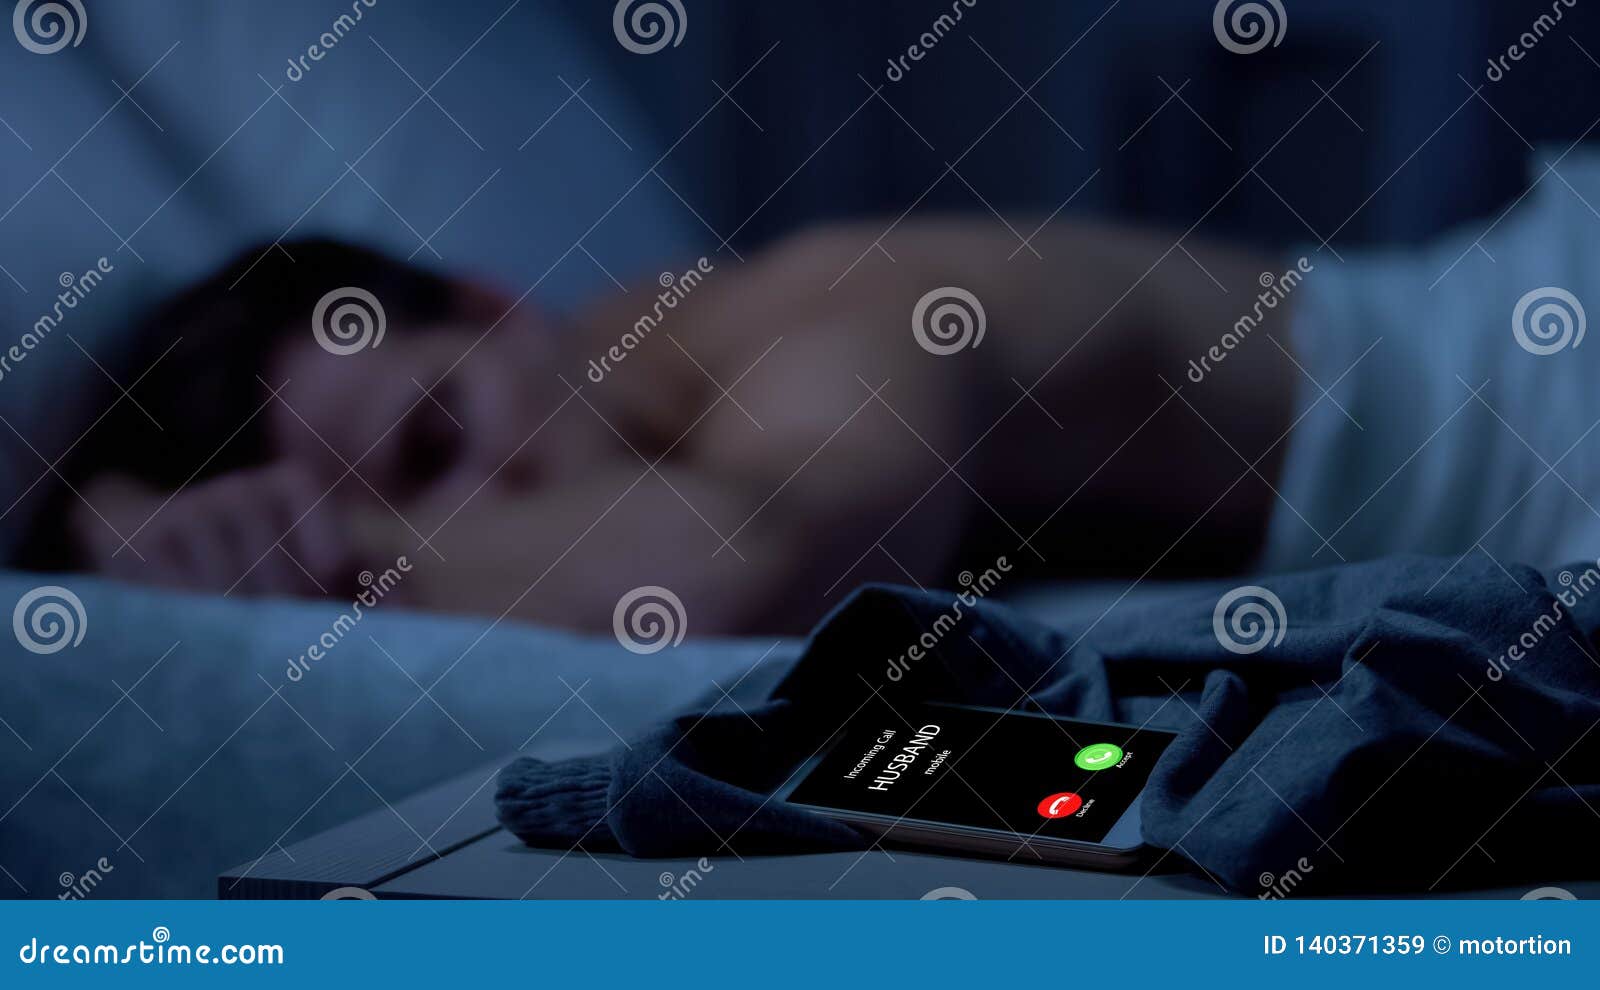 Husband Calling while Male Sleeping Deeply, Missing Call, Same-sex Relations Stock Image picture photo